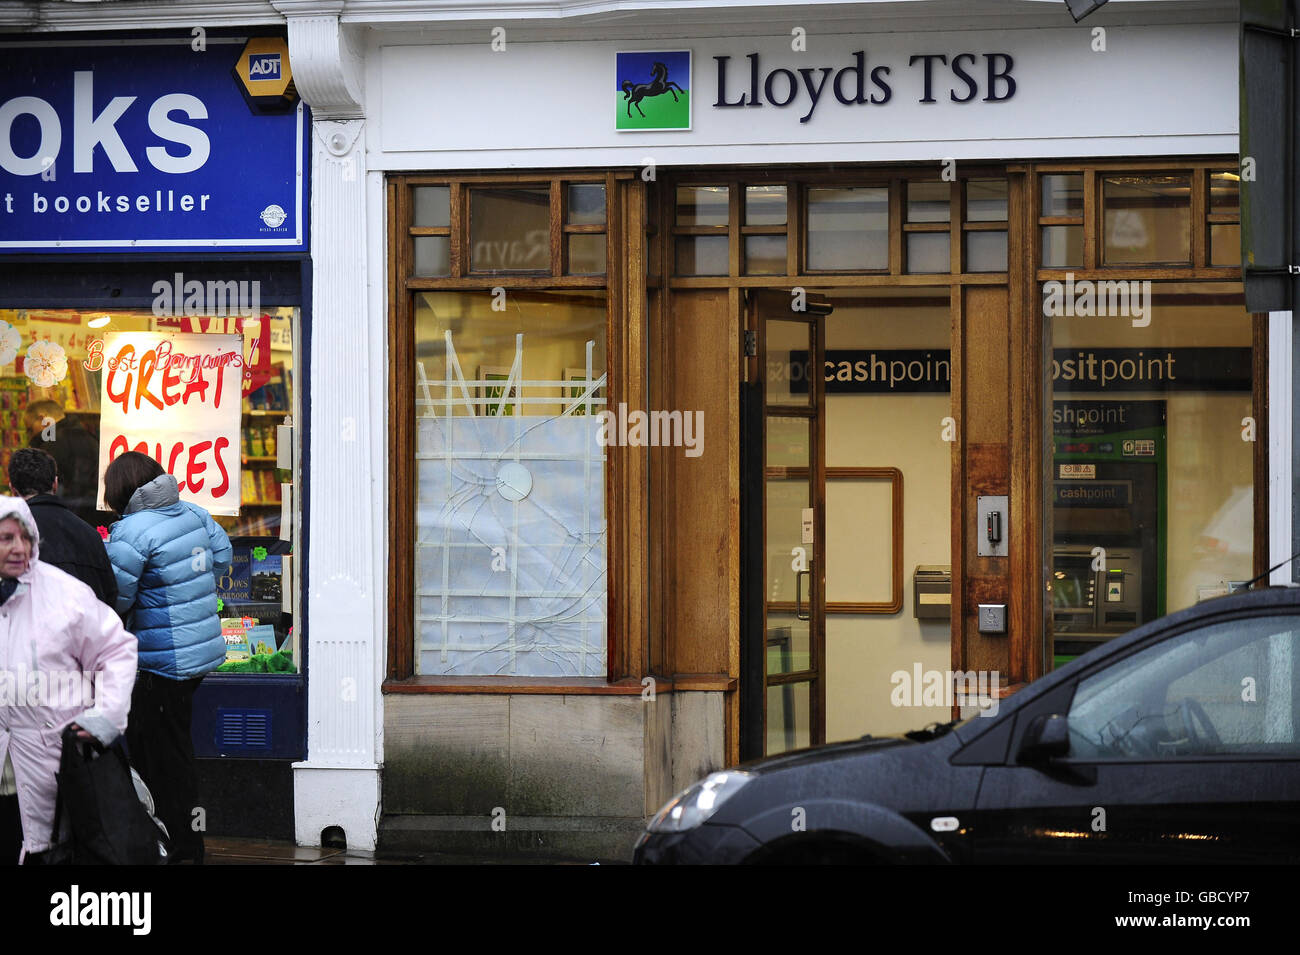 A taped broken window waits to be repaired at the Lloyds TSB Bank branch in Ilkley, it is not know how or why the window was broken. Stock Photo